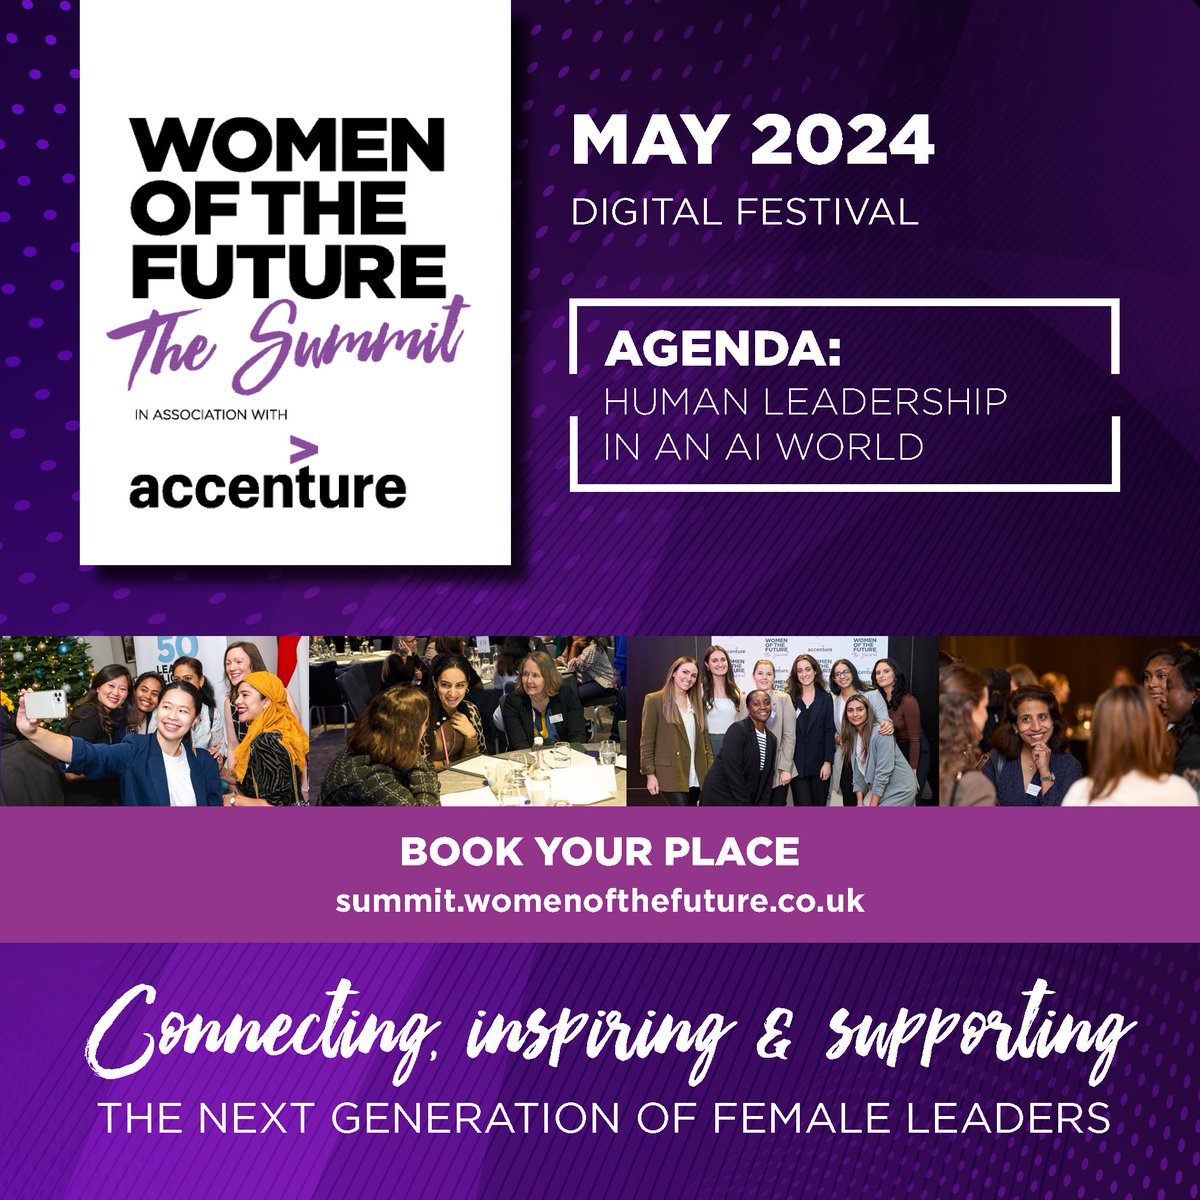 We are excited to announce our Women of the Future #Summit Asia Pacific! 🙌
Book your place to join us for our week digital festival! summit.womenofthefuture.co.uk/asiapacific/bo… 
 #virtualevent #digitalfestival #communtiy #AI #generation #technology #communities #youngwomen #nextgeneration #leaders